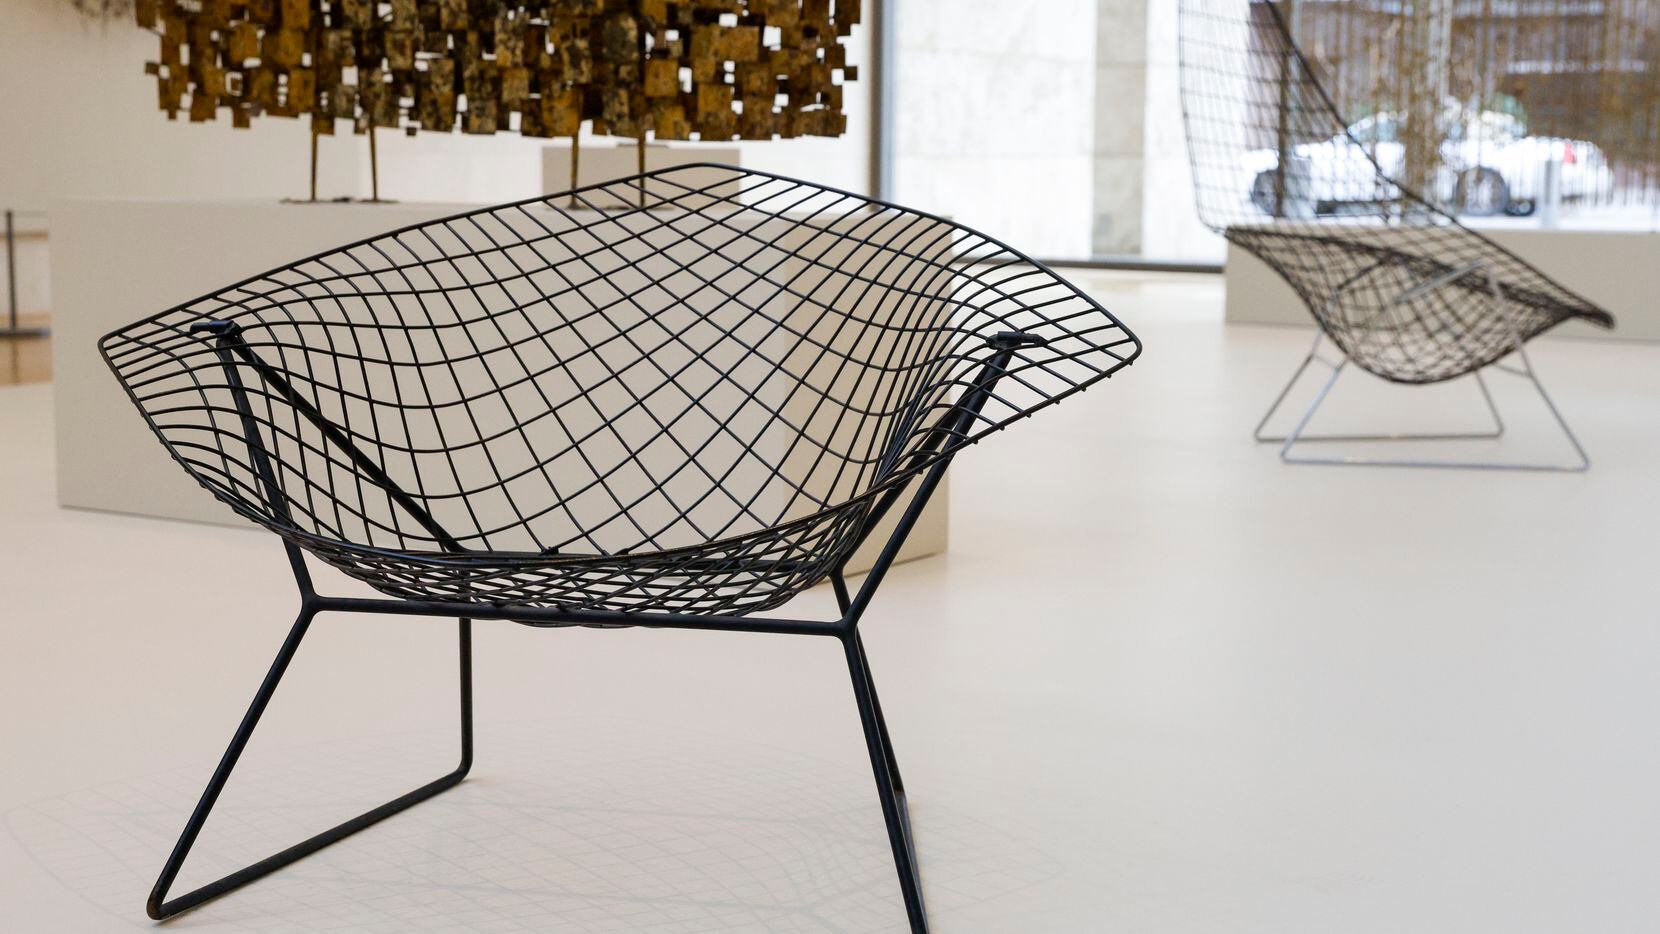 “Prototype Diamond Chair” is on view at the Nasher Sculpture Center as part of the "Harry...